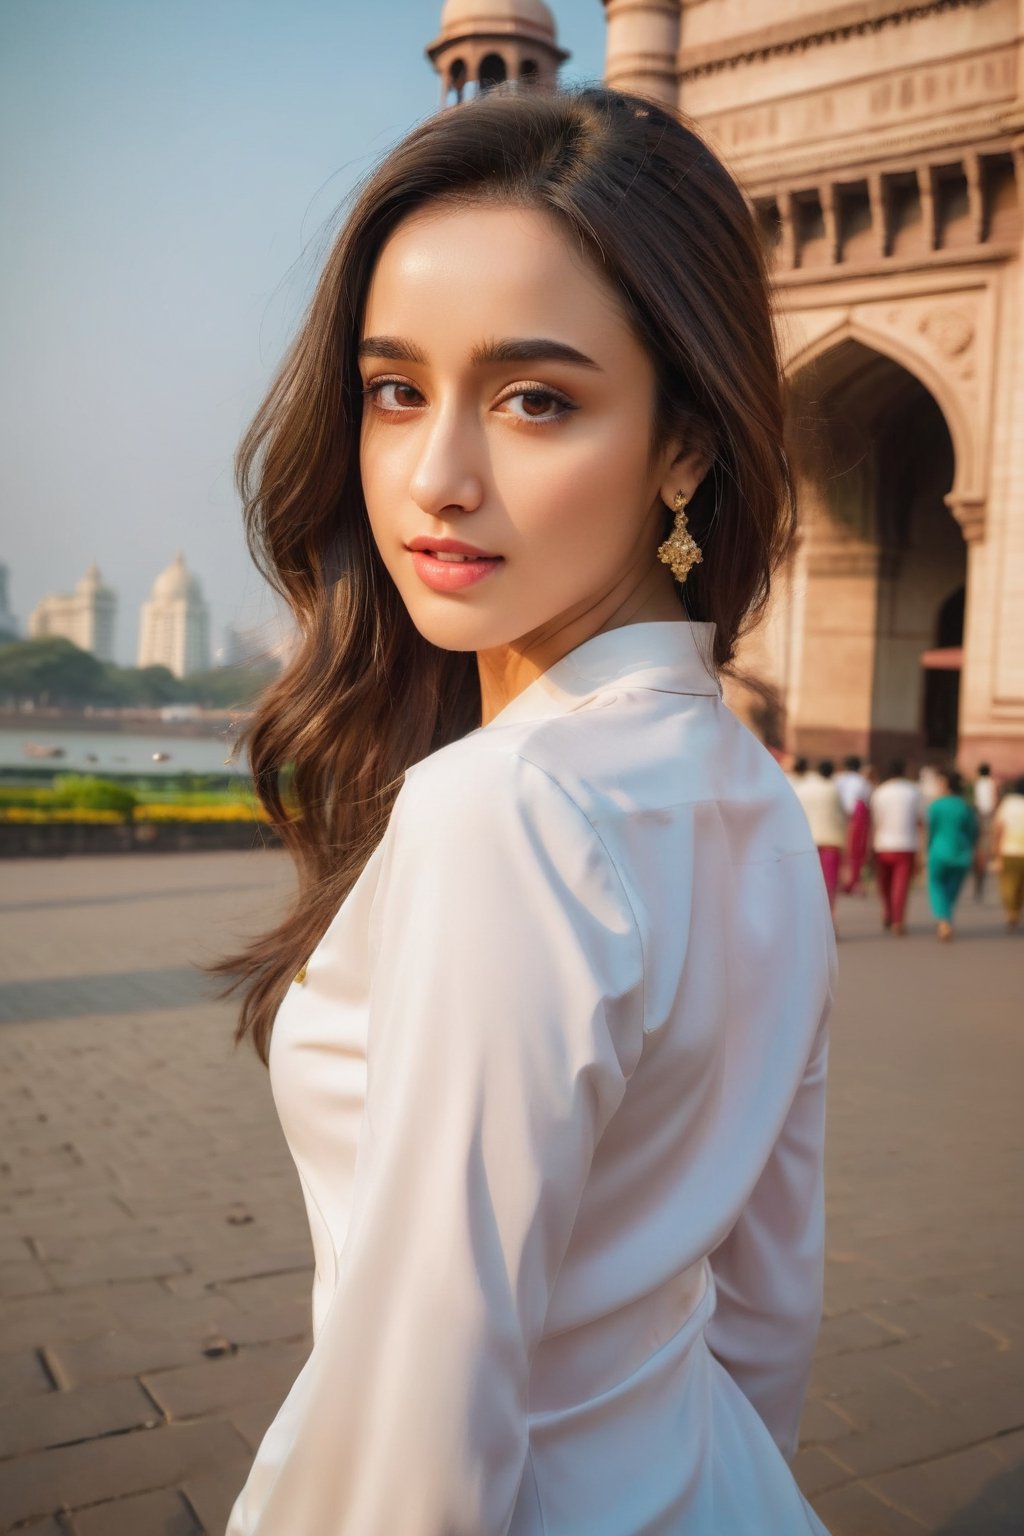 young woman face features like (shraddha kapoor),oval face ,(smaller forehead),cute, ((white skin)), having walk in mumbai in front of gateway of india wearing pants , rich detailed complex background, detail facial features, focus on skin texture, detailed hairs, natural look, cute posture, pose, hands,wearing sexy dress, candid moments, ((POV wide angle shot, subject facing away from camera)), back shot, focus on background, Beautiful Instagram Model,dashataran,happy facial expression, professional photos, studio lighting, raw edits